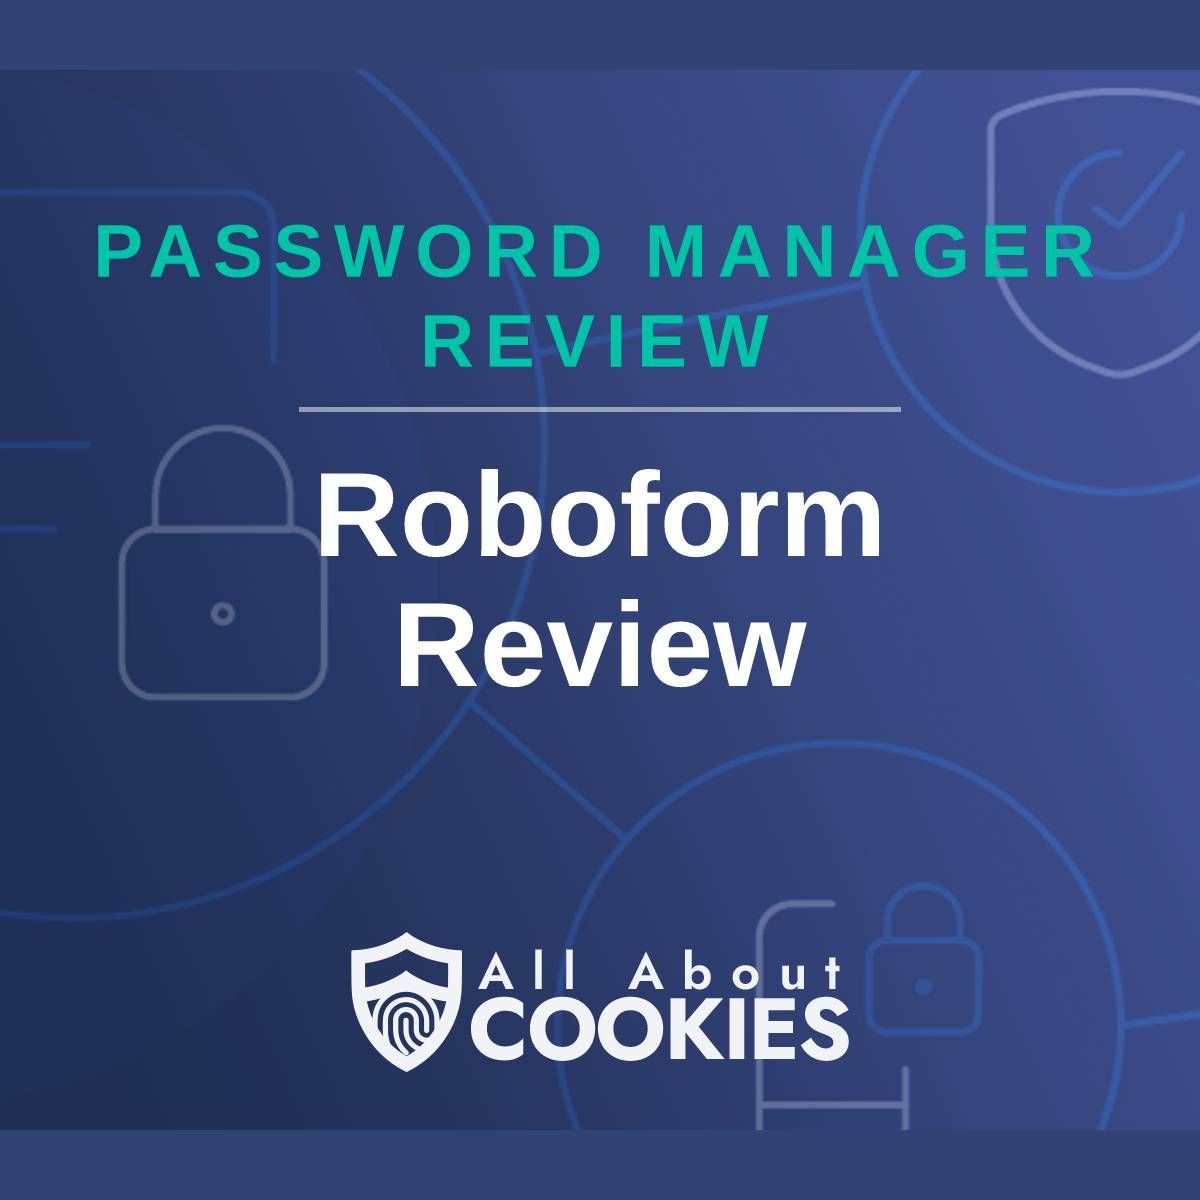 A blue background with images of locks and shields with the text &quot;Password Manager Review Roboform Review&quot; and the All About Cookies logo. 